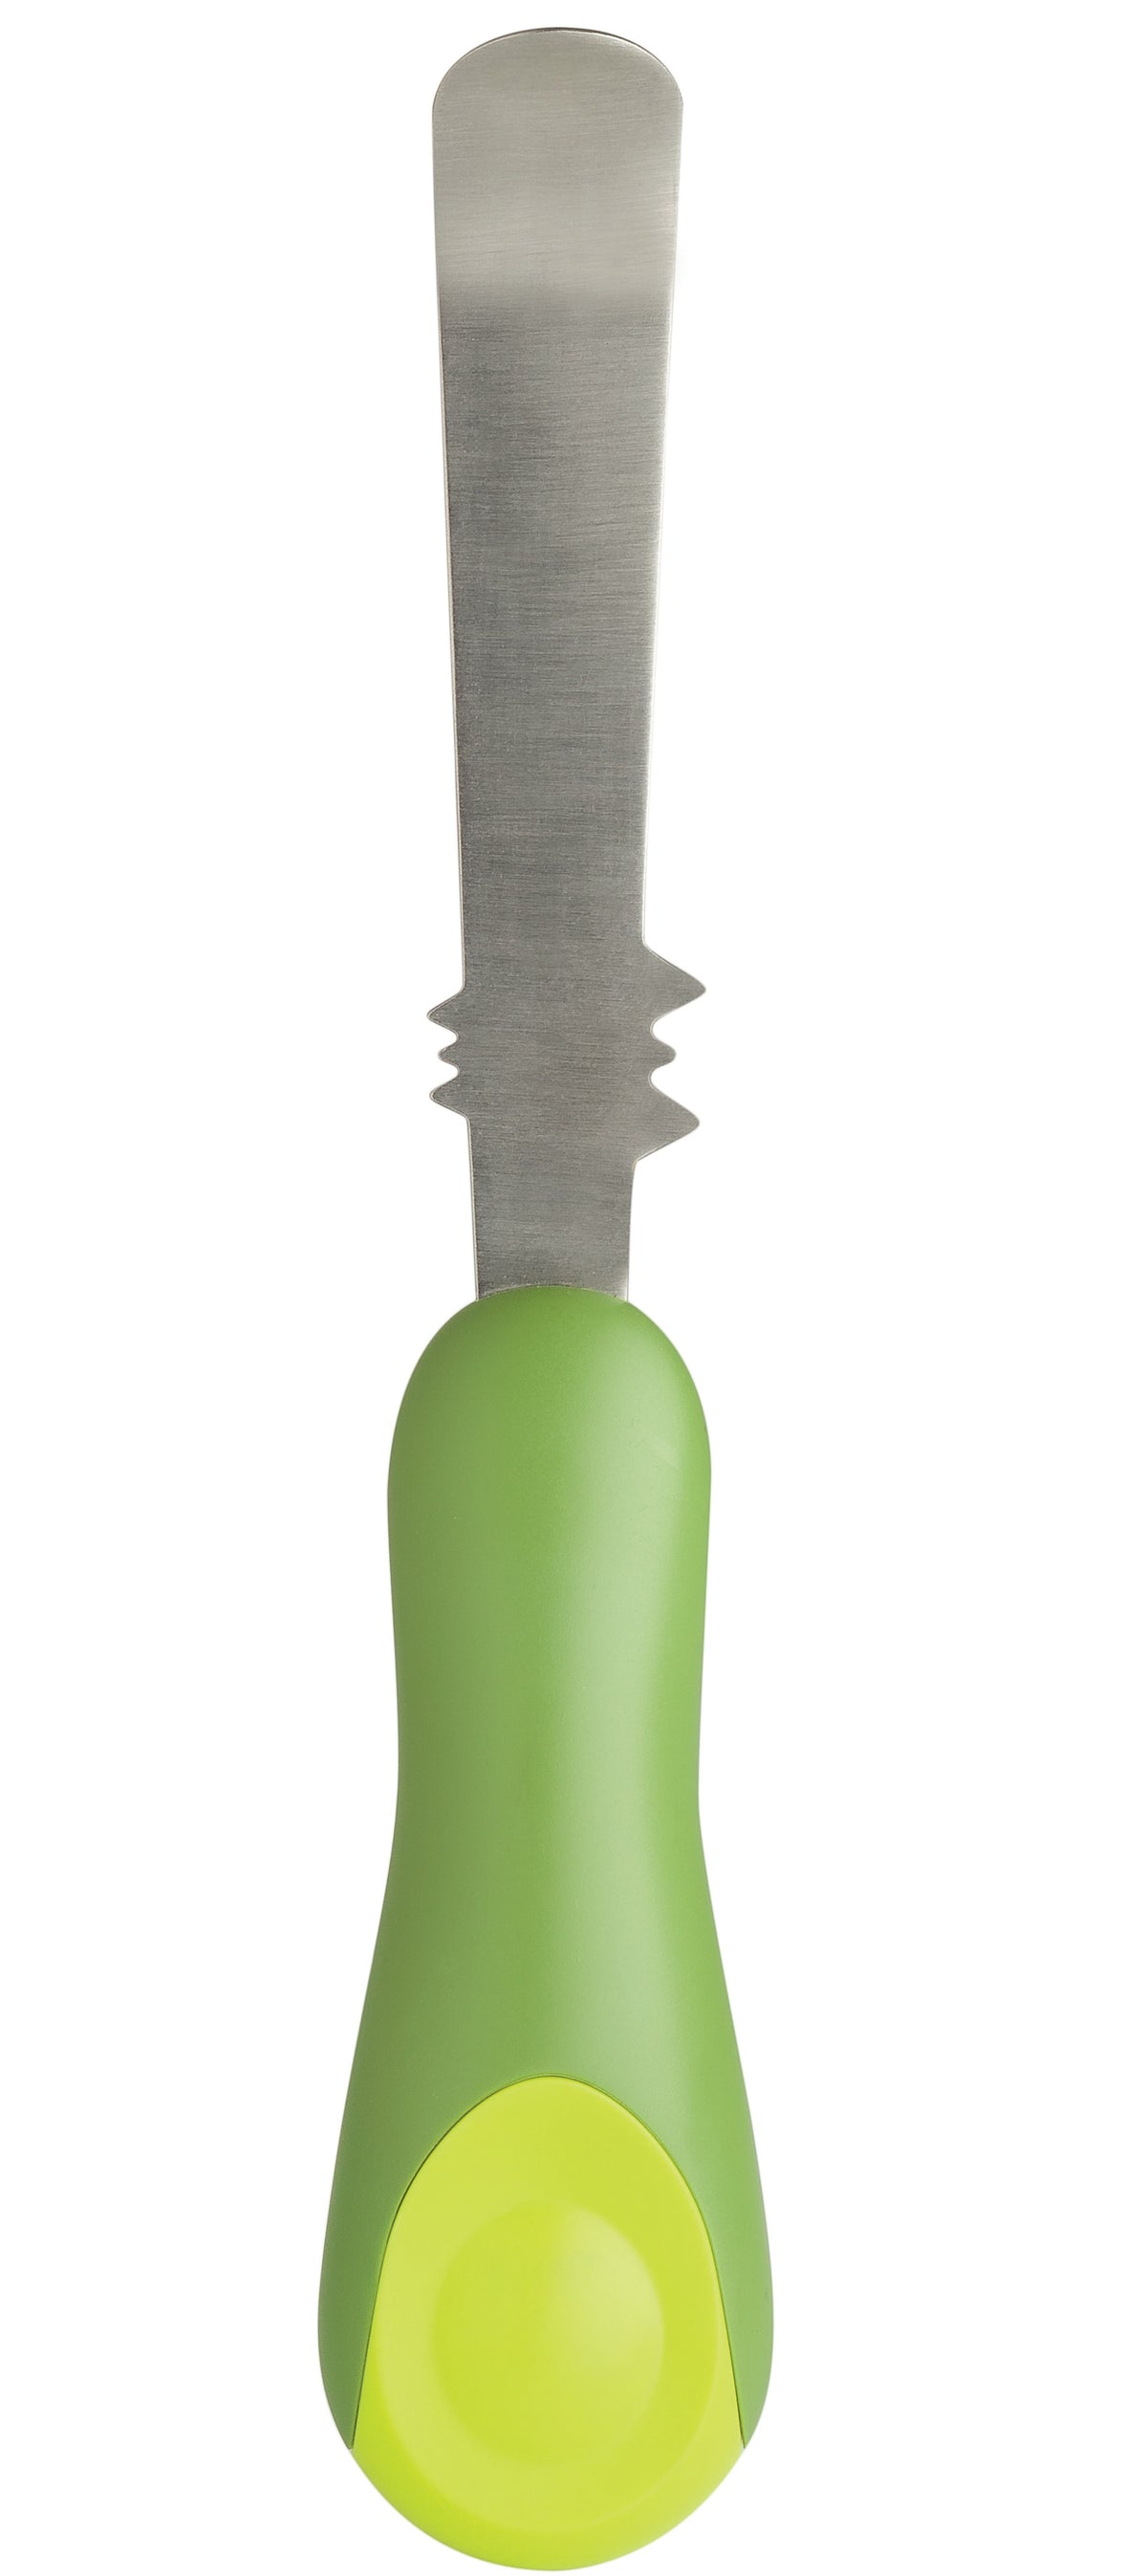 The World's Greatest 93250 All-in-One Avocado Tool